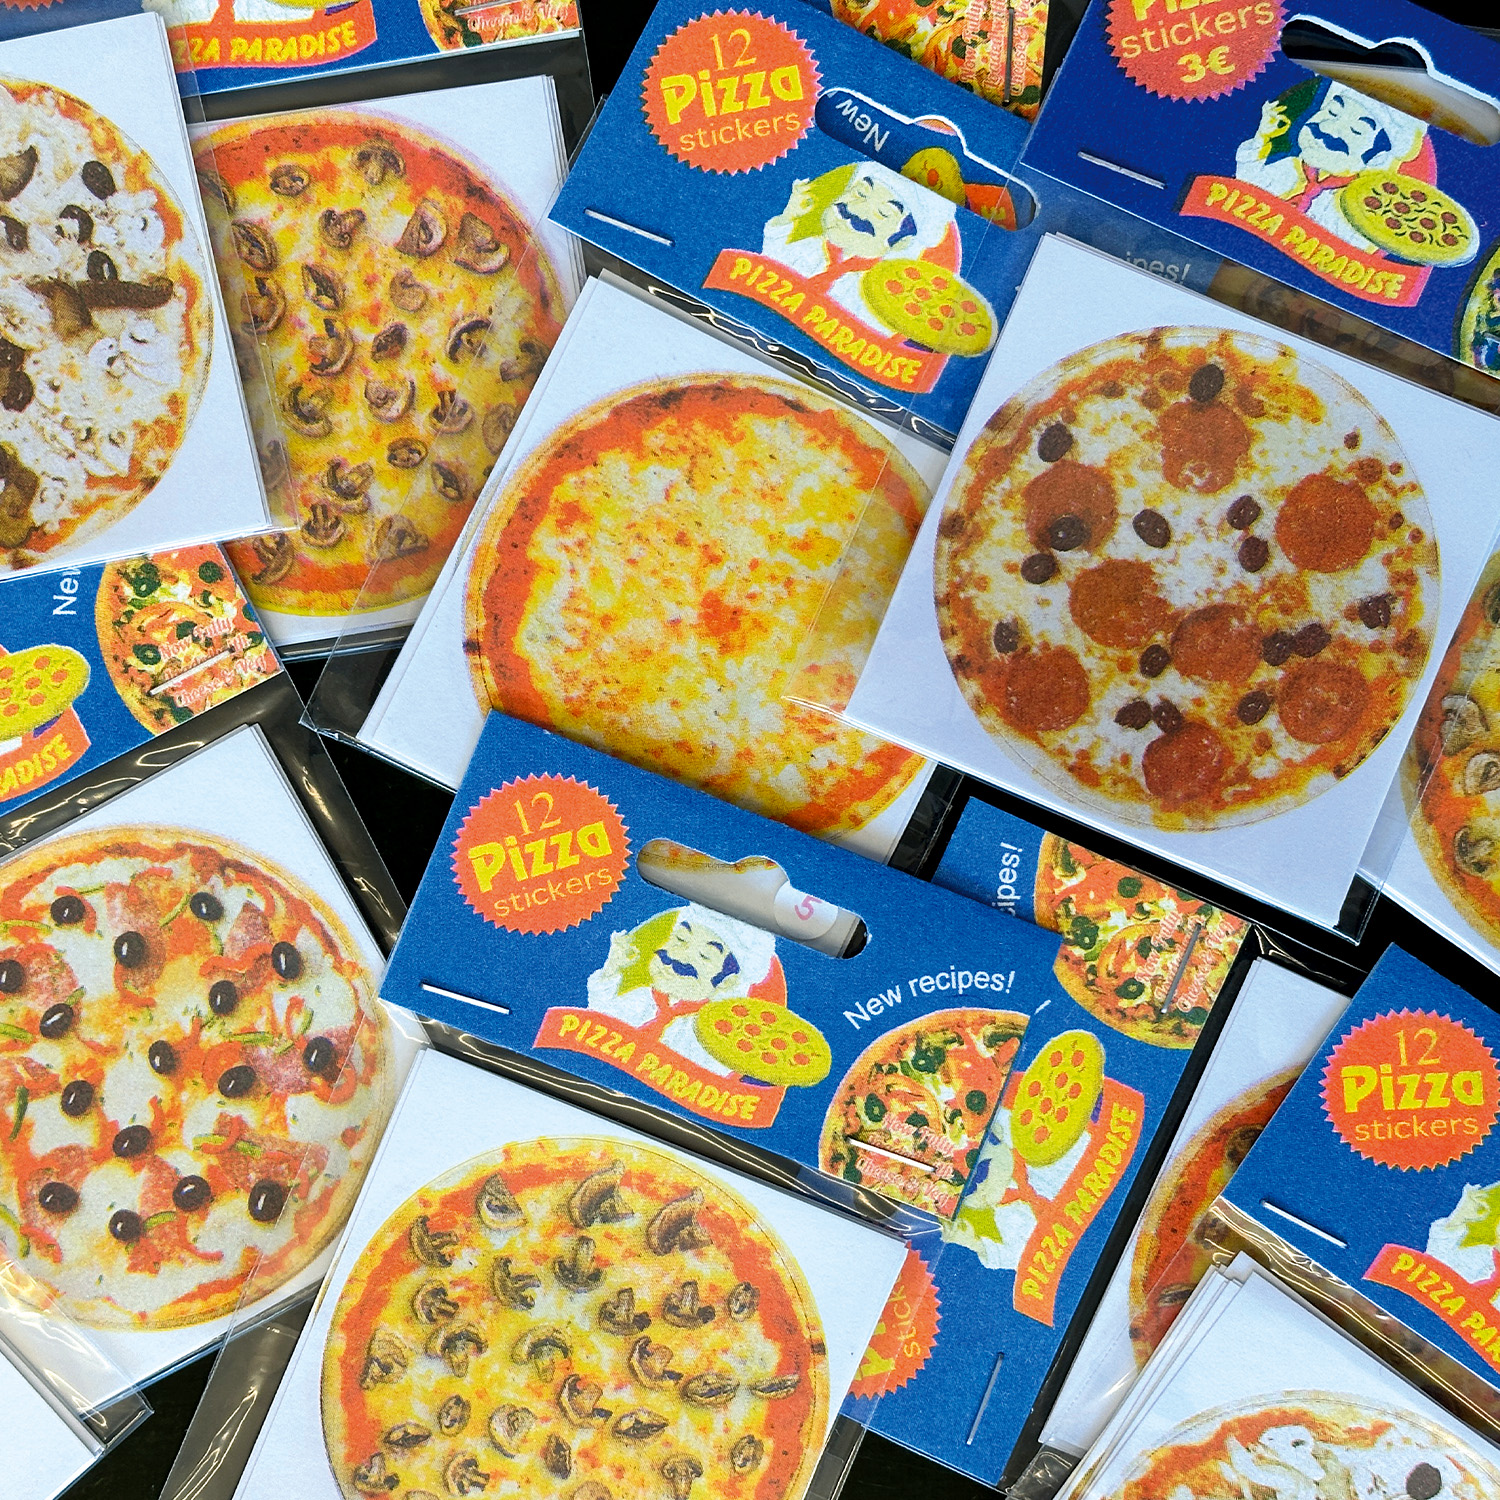 The stickers collection: Pizza paradise